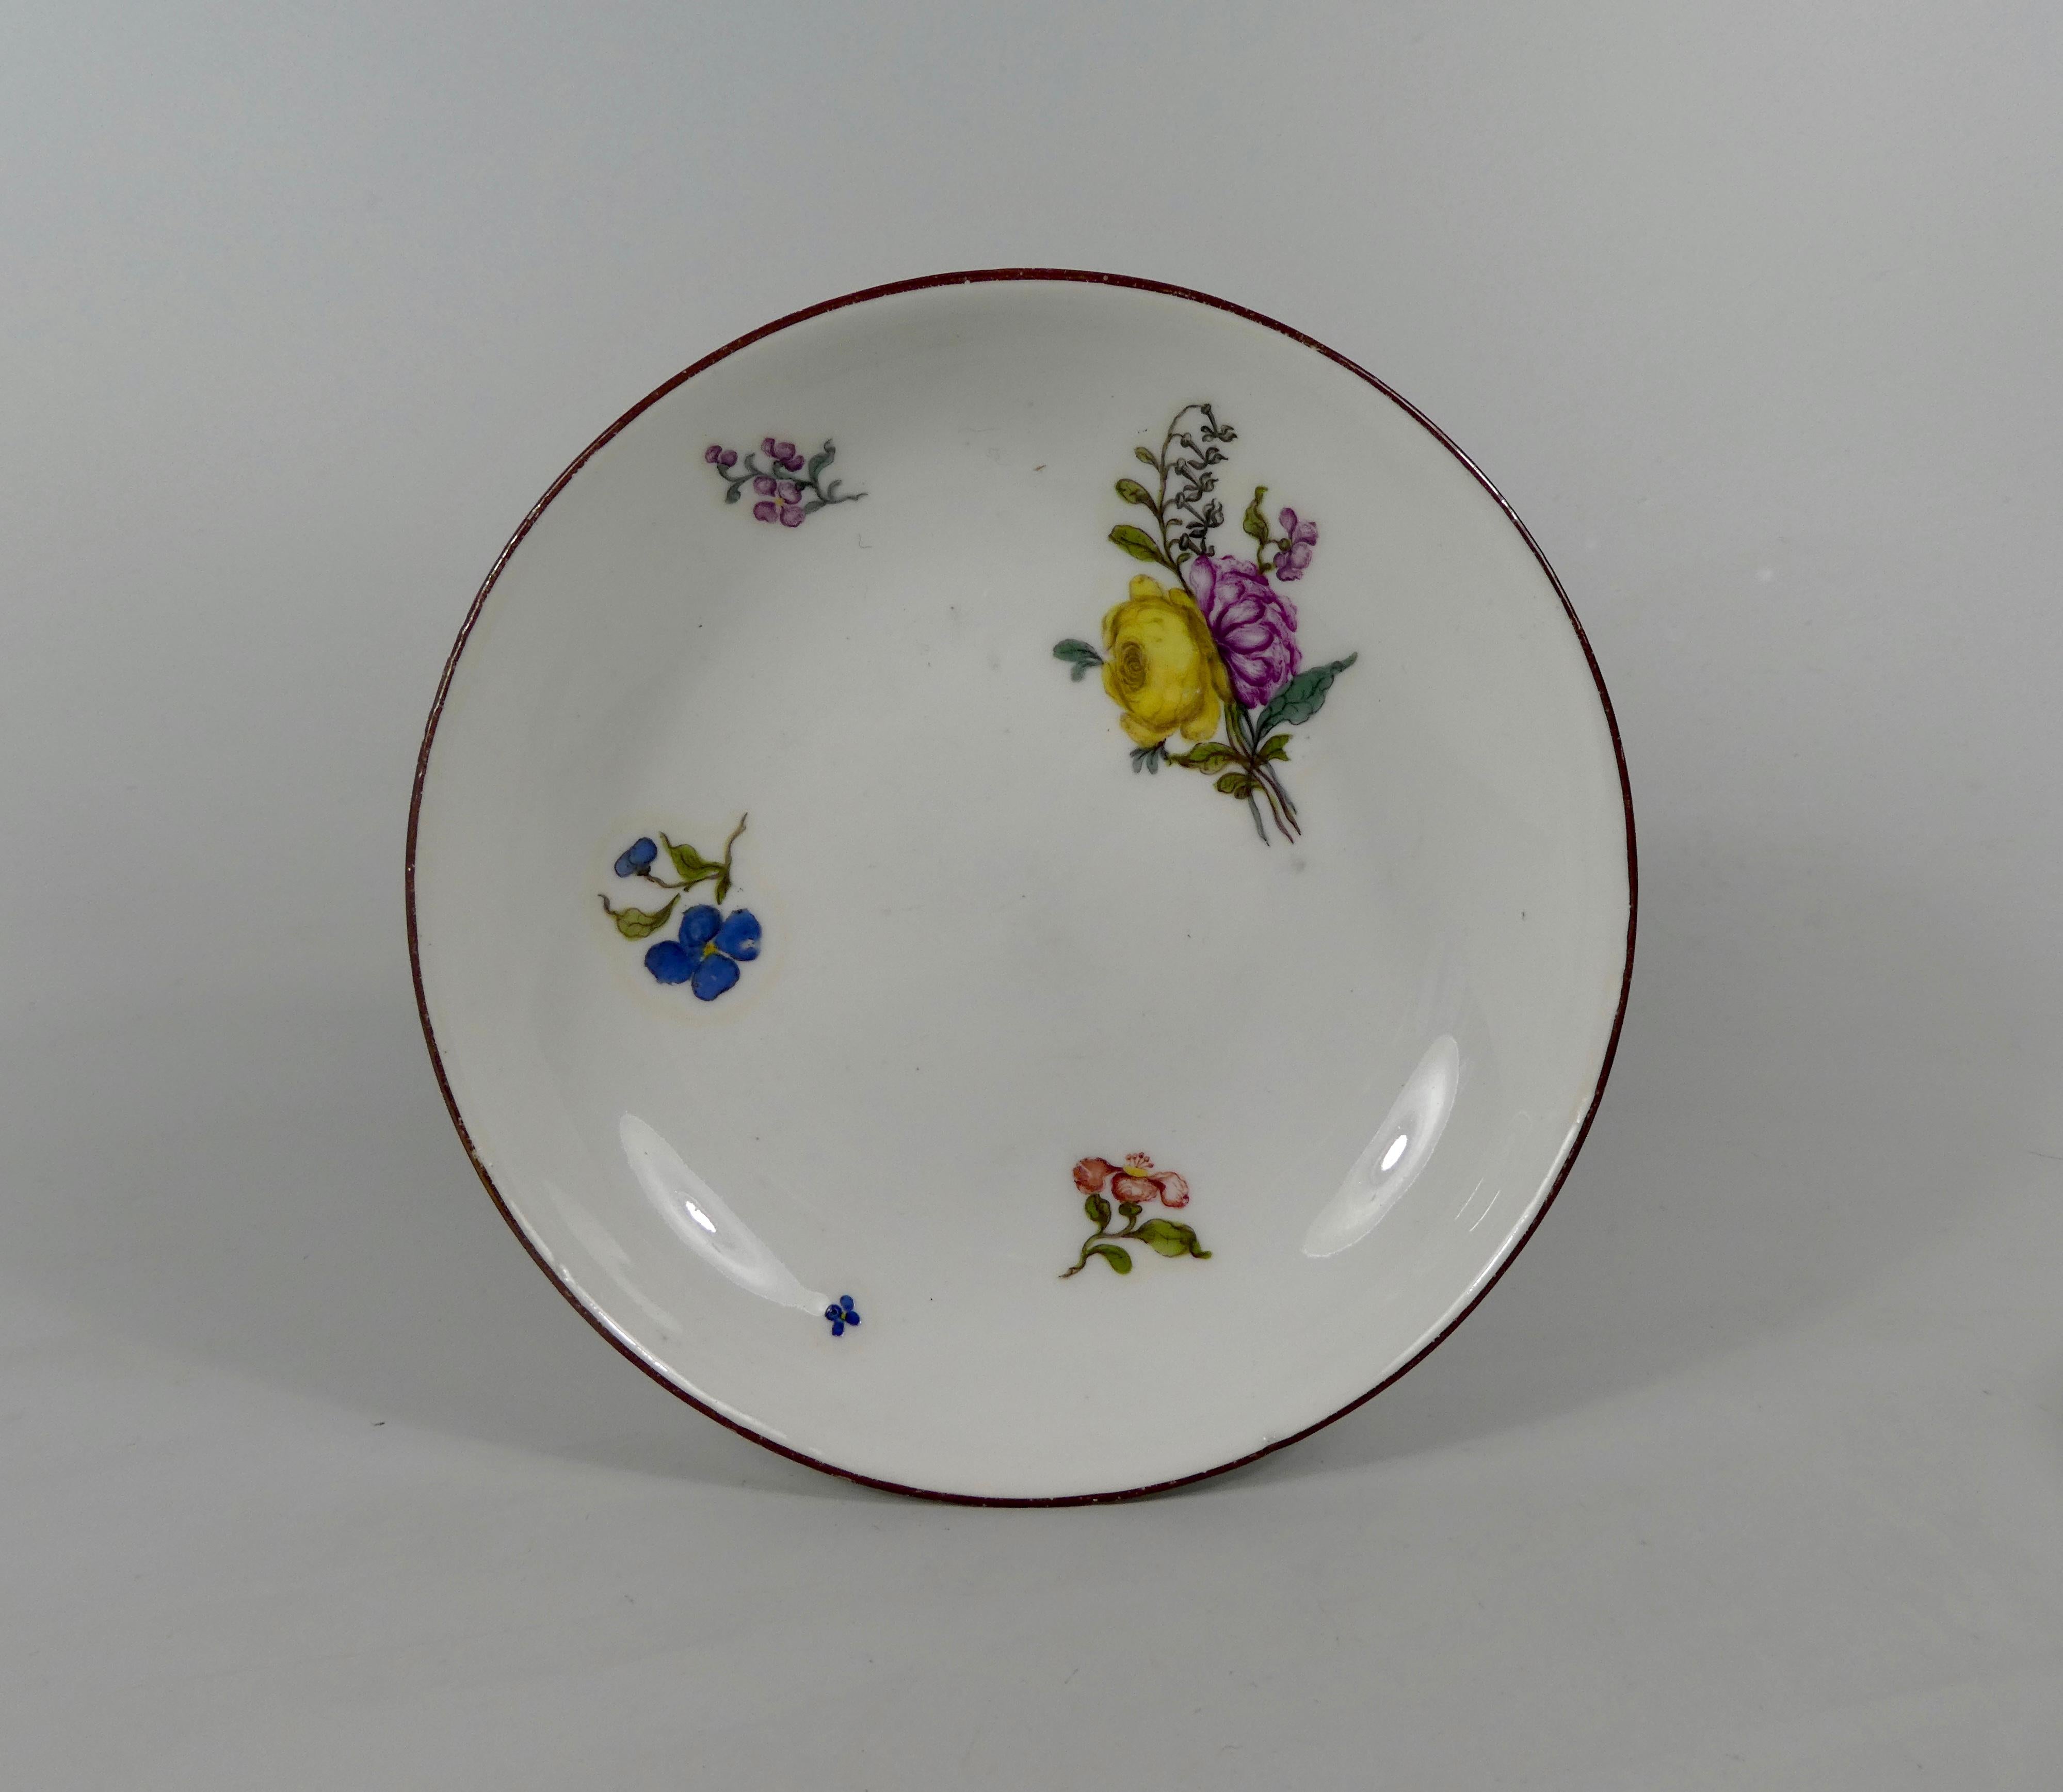 Fine Meissen Porcelain cup and saucer, circa 1740. The cup having an elaborate scroll handle, and painted with a large spray of flowers, and further smaller sprays. The saucer similarly decorated.
Underglaze blue crossed swords mark to both